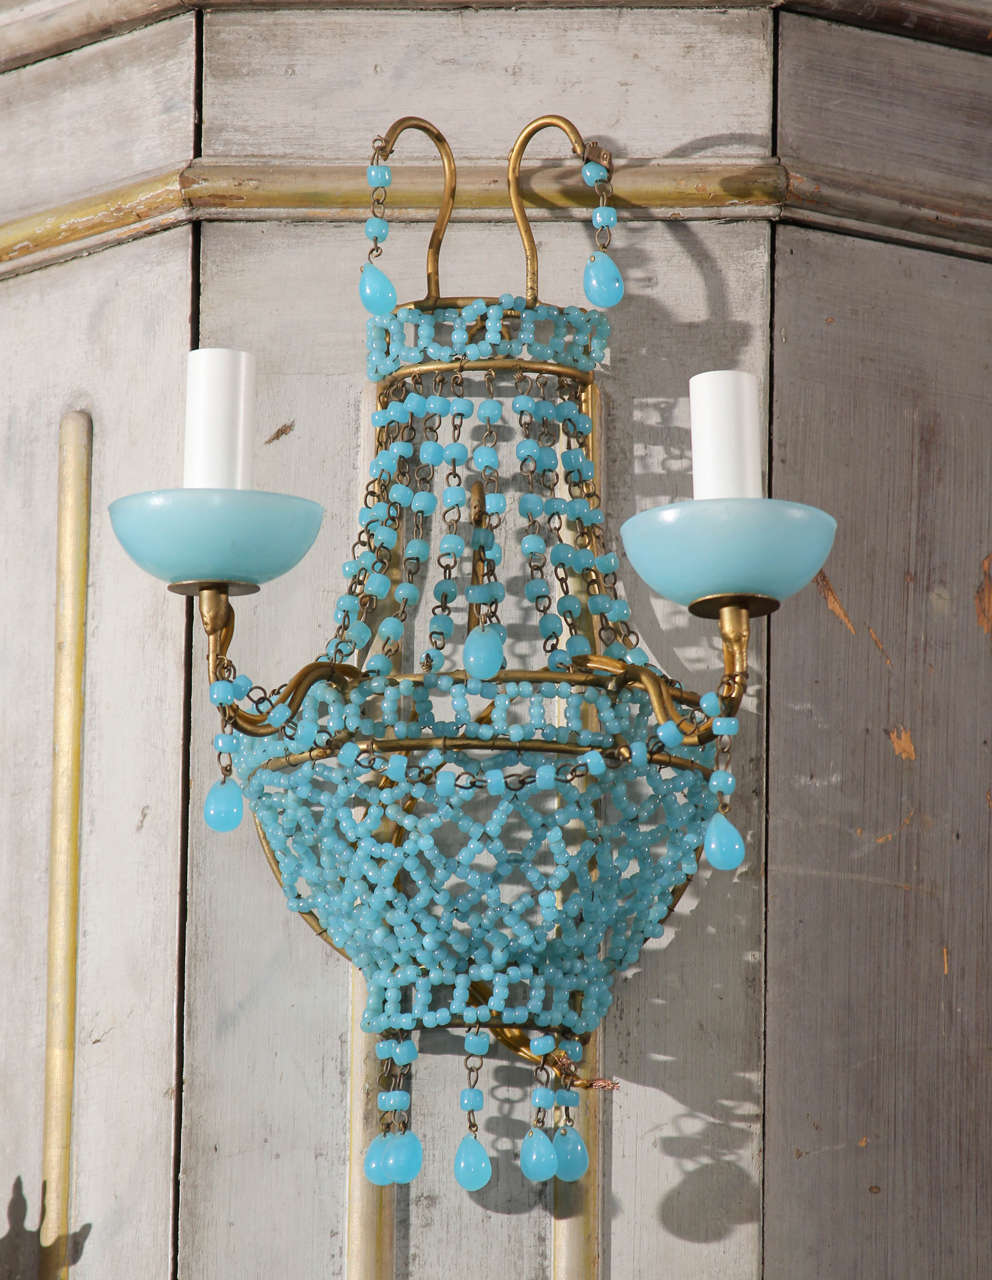 Great small-scale pair of Italian beaded sconces in blue glass.